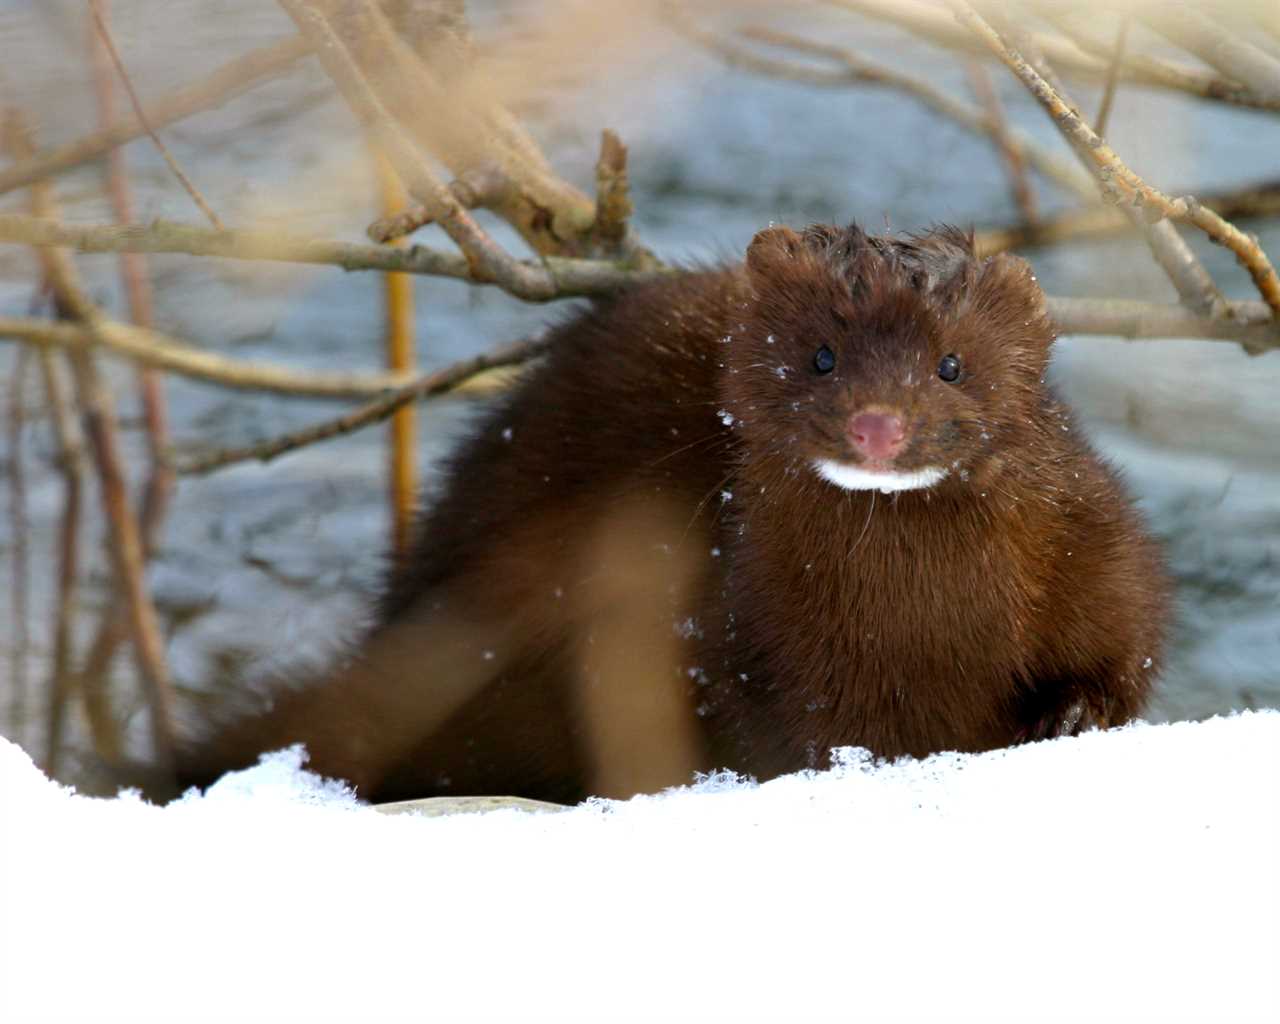 Mink in Utah test positive for Covid in first US wild animal case of virus as over 15k critters culled since August